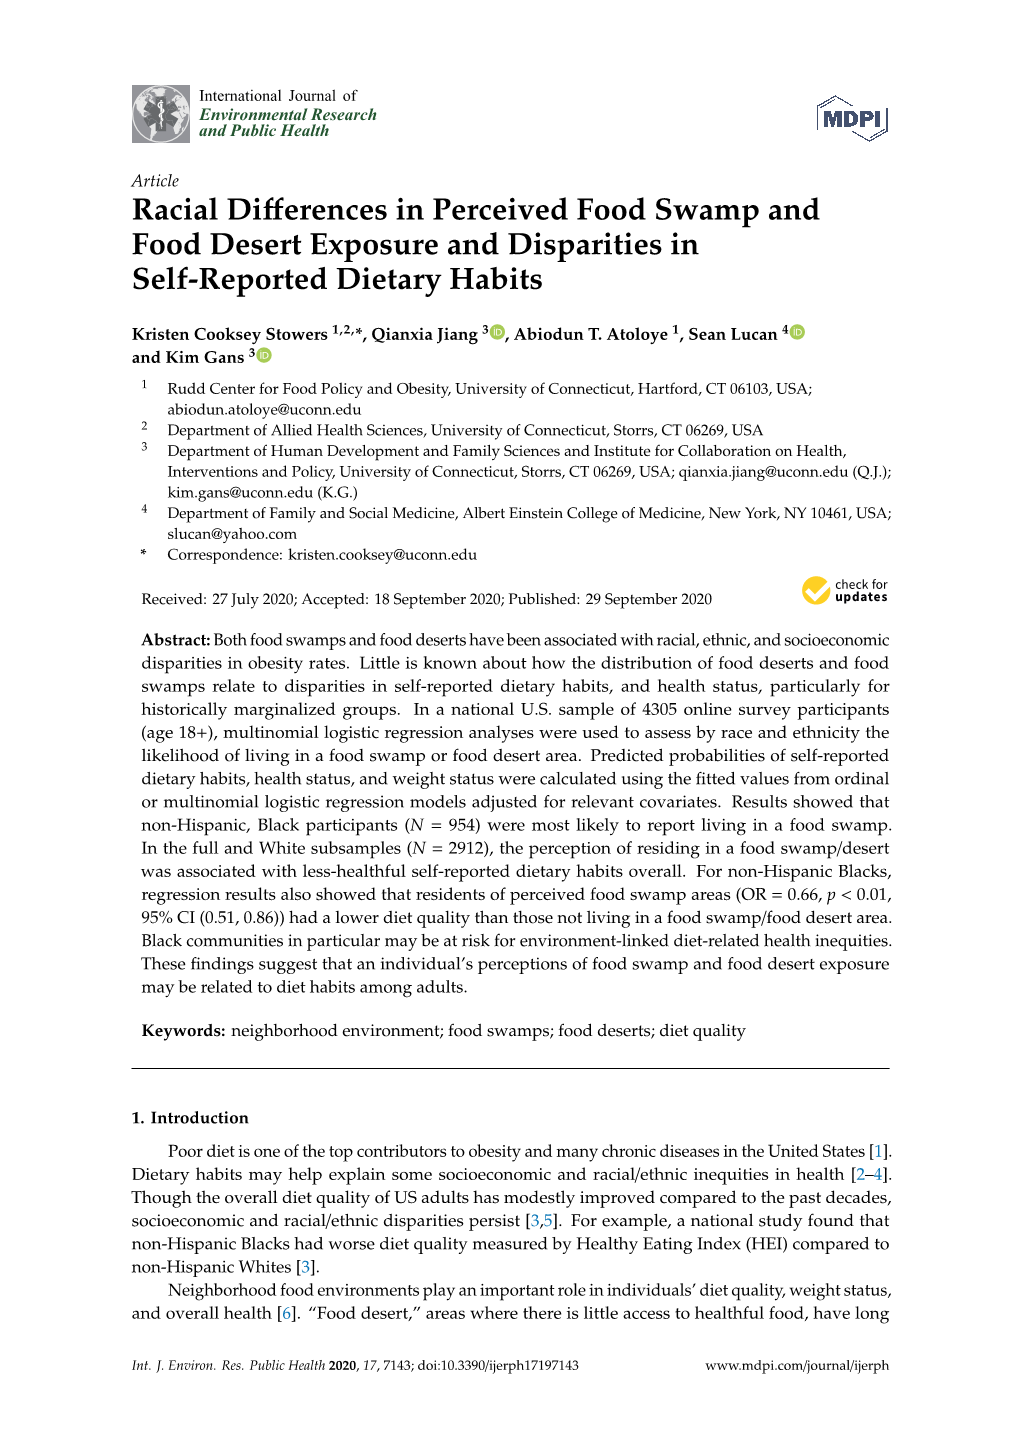 Racial Differences in Perceived Food Swamp and Food Desert Exposure